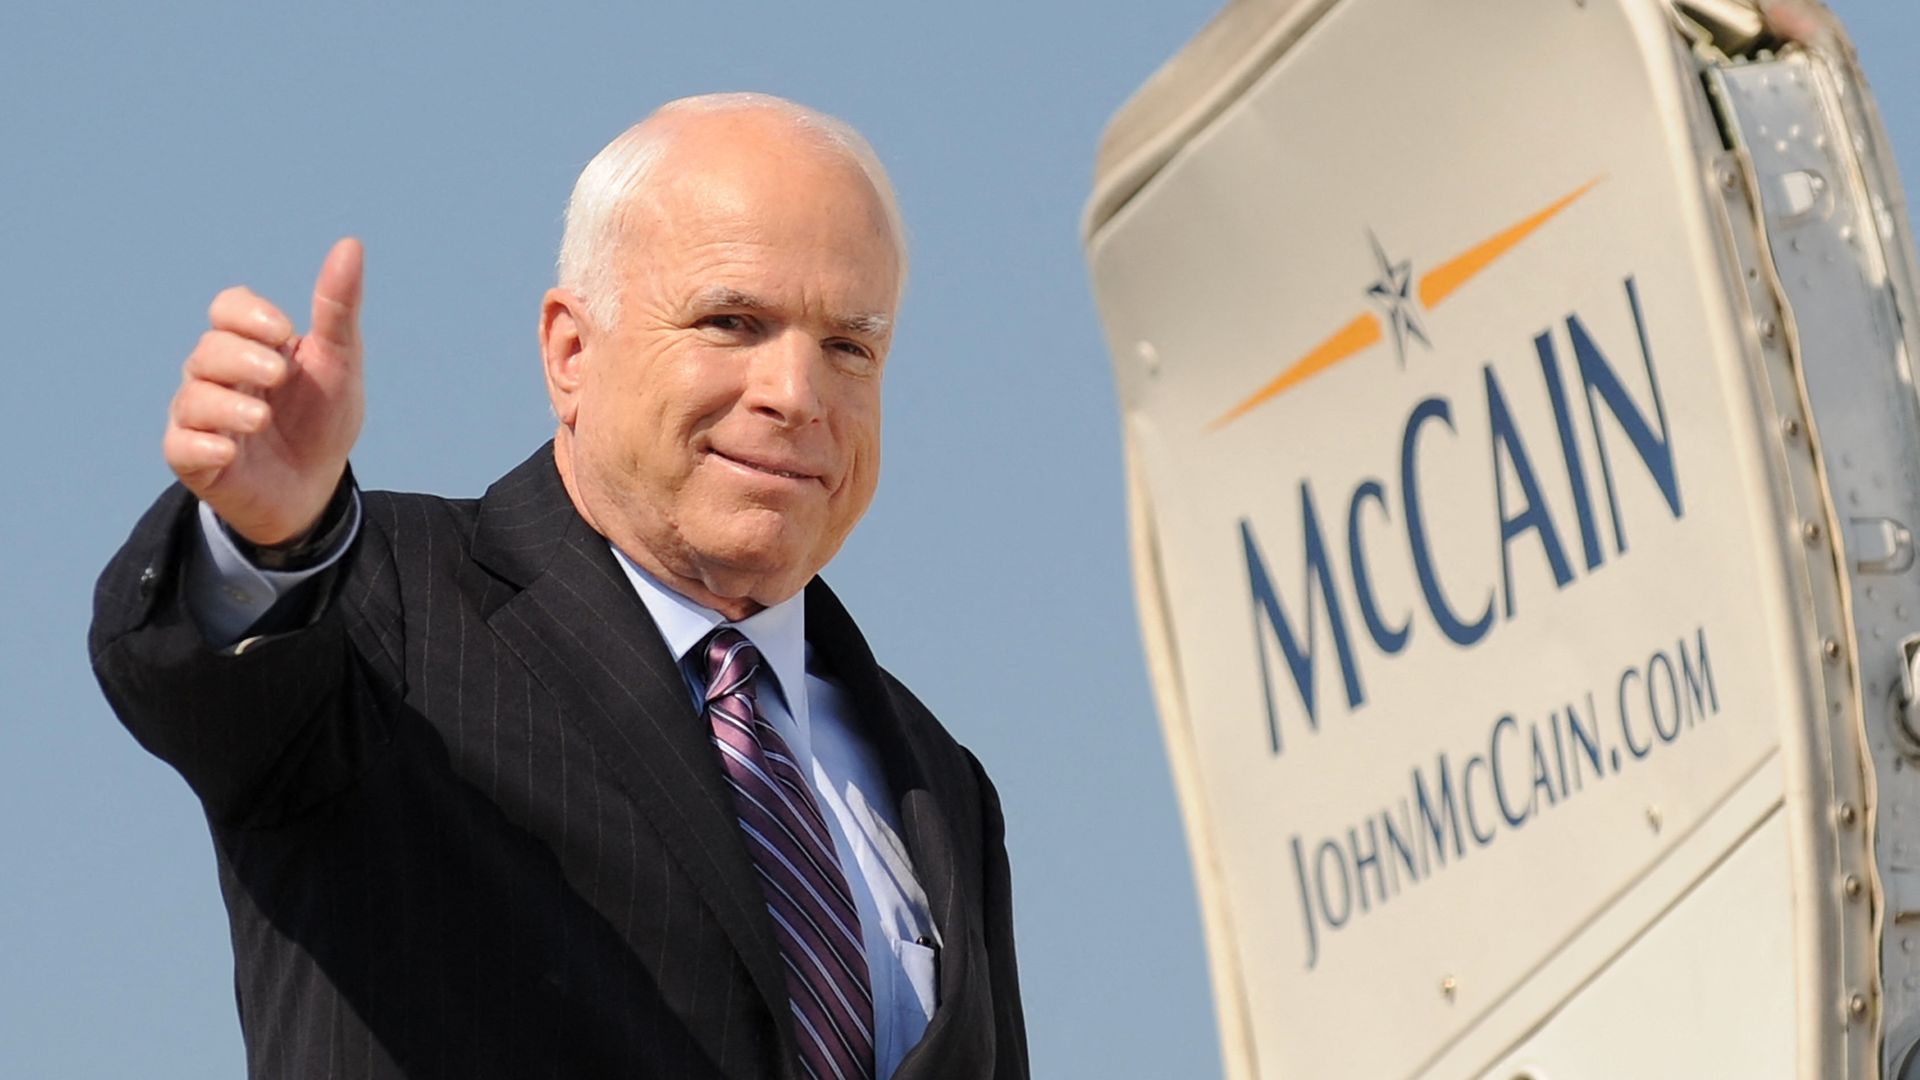 A smiling man gives a thumbs up next to an open airplane door with the word McCain written on it.